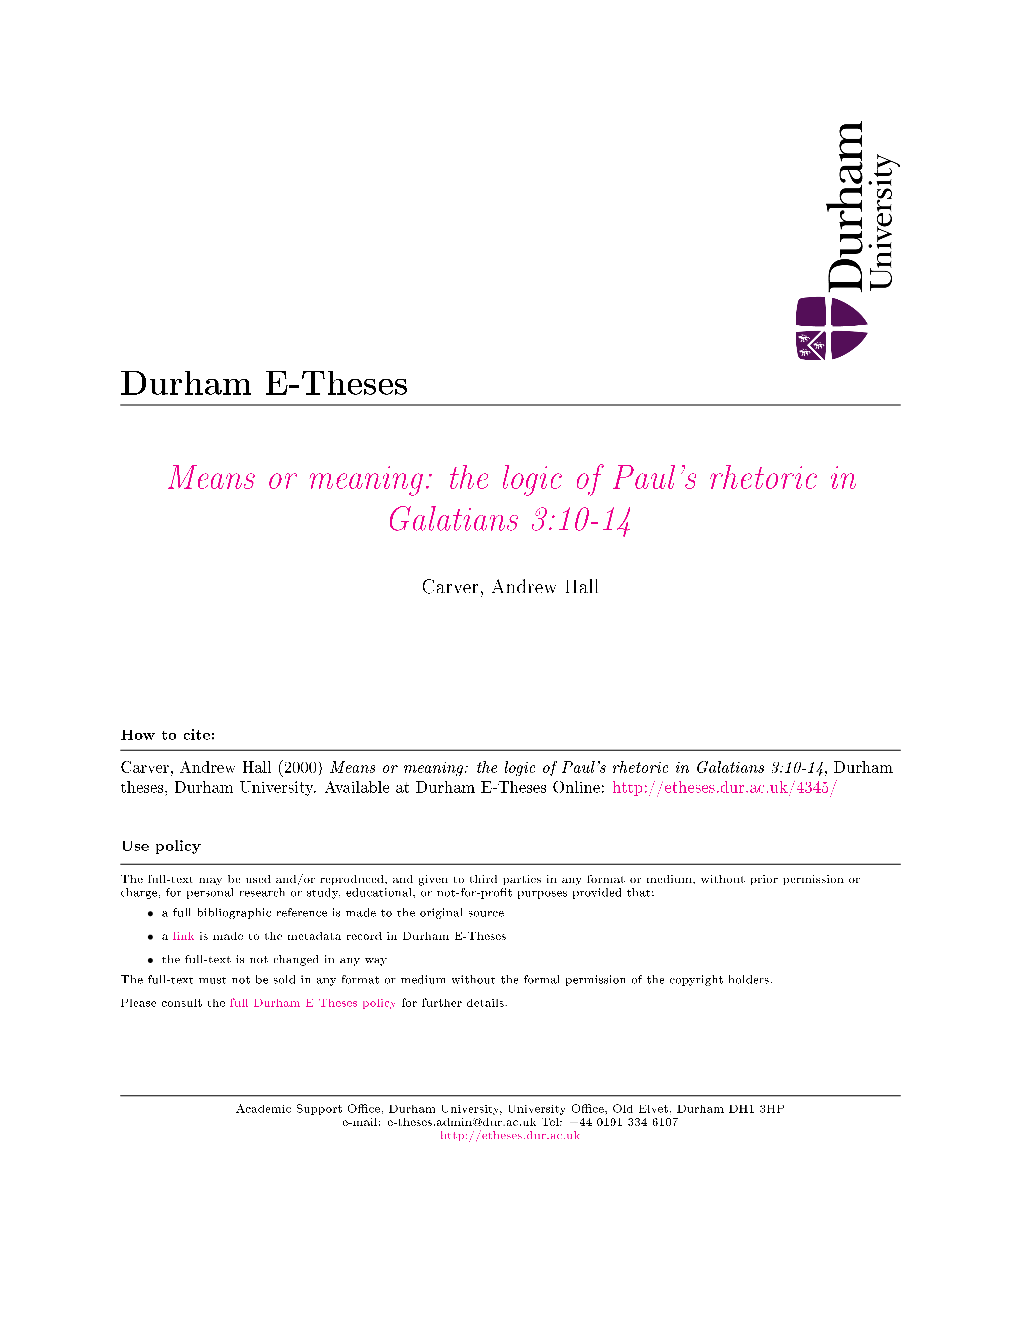 Means Or Meaning: the Logic of Paul's Rhetoric in Galatians 3:10-14